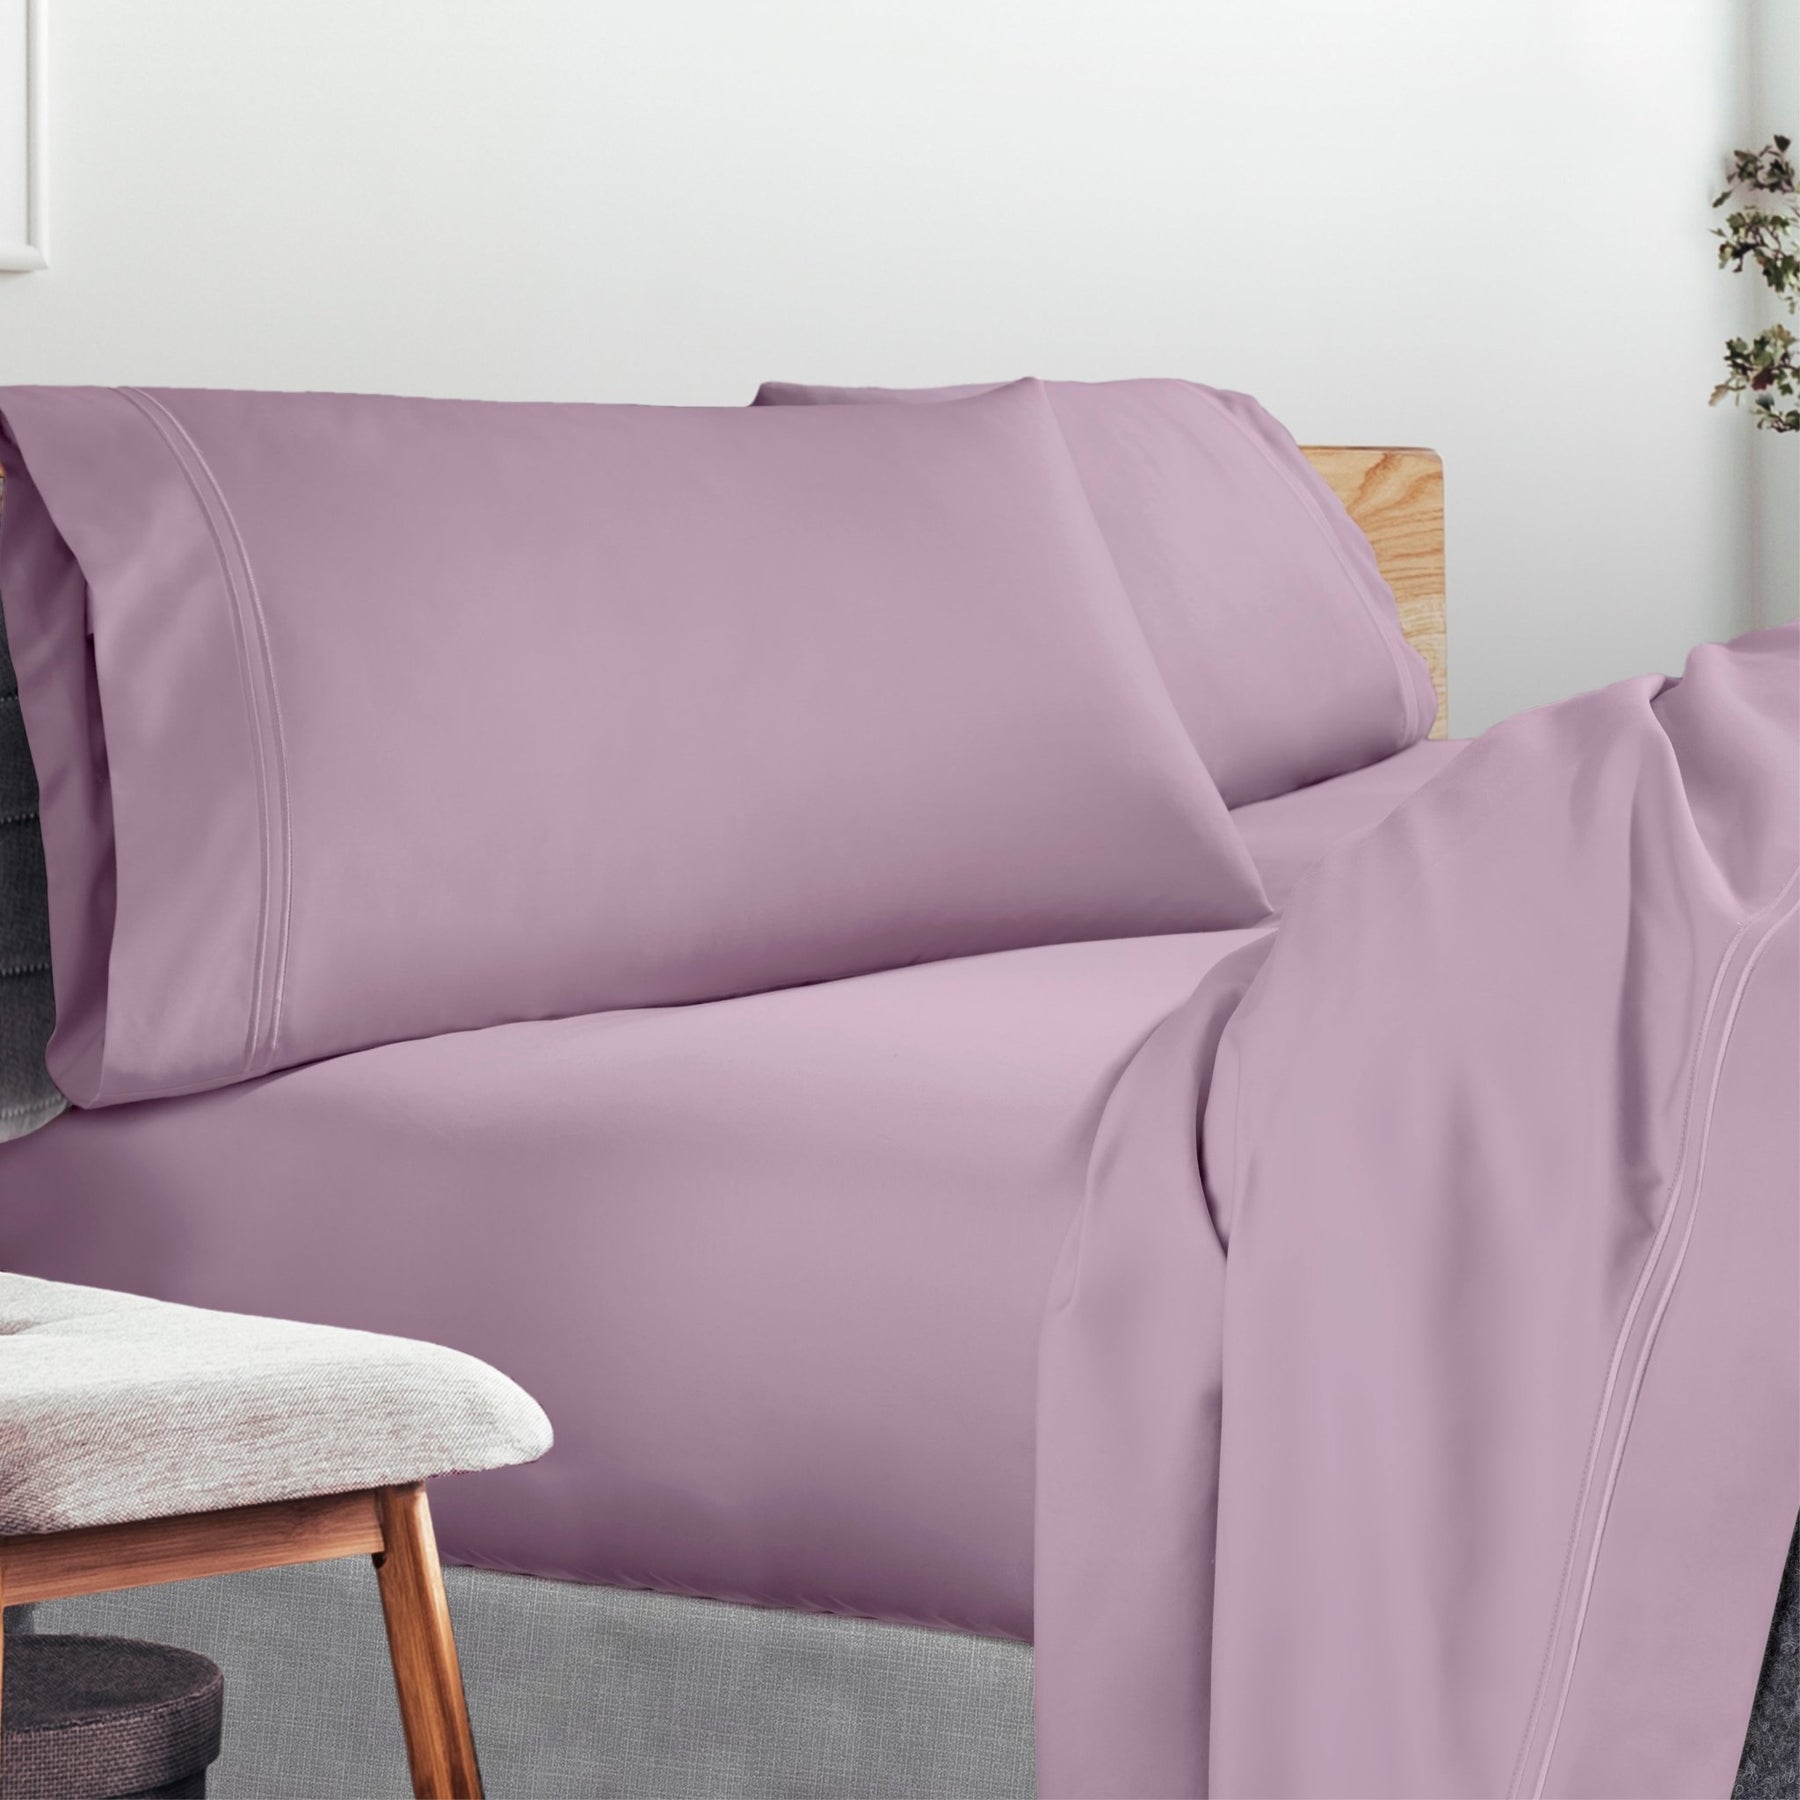 Image of a lived-in bed with a Lilac Refreshing TENCEL™ Lycocell Sheet Set on it